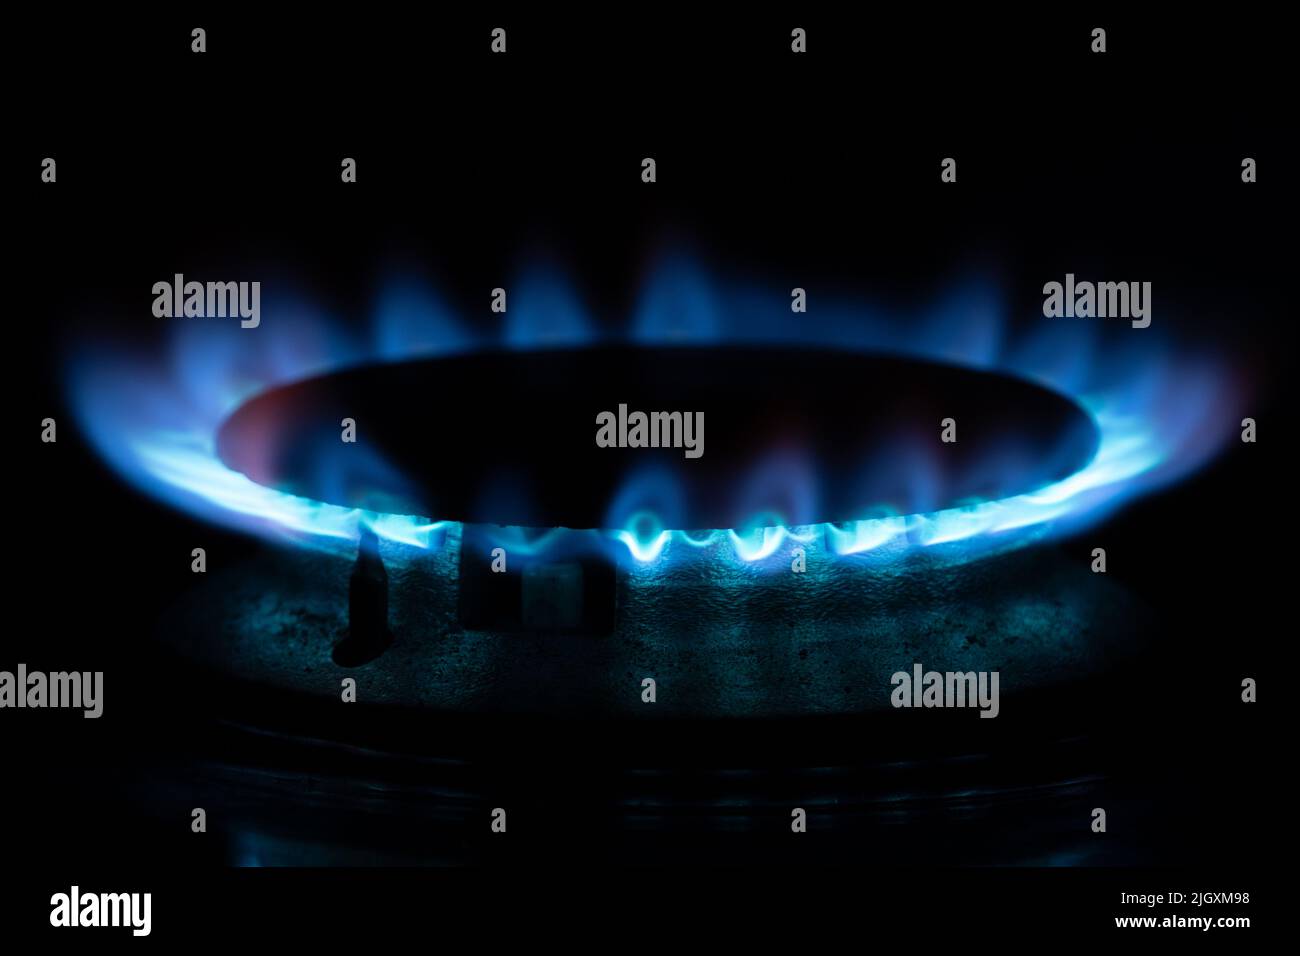 Gas Hob ring or burner with blue flame emissions. Concepts of energy, bills, heating, cooking, fossil fuels, winter Stock Photo